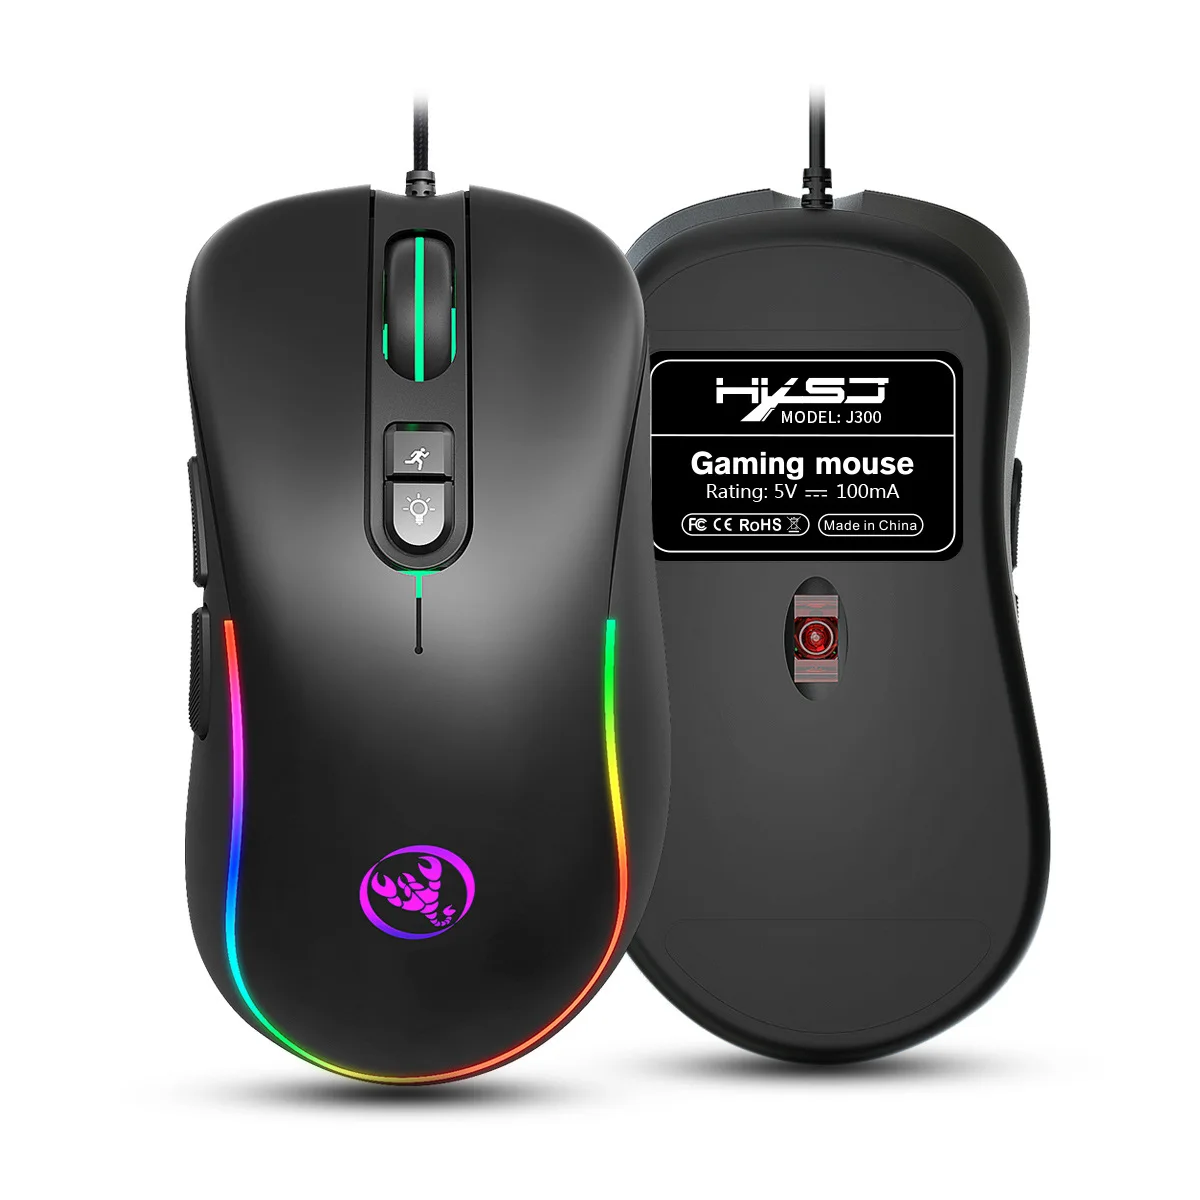 

Hot Selling With Colorful Led Lights Wired Gaming Mouse For Pc Laptop and Mac Computers Max6400DPI, Customized